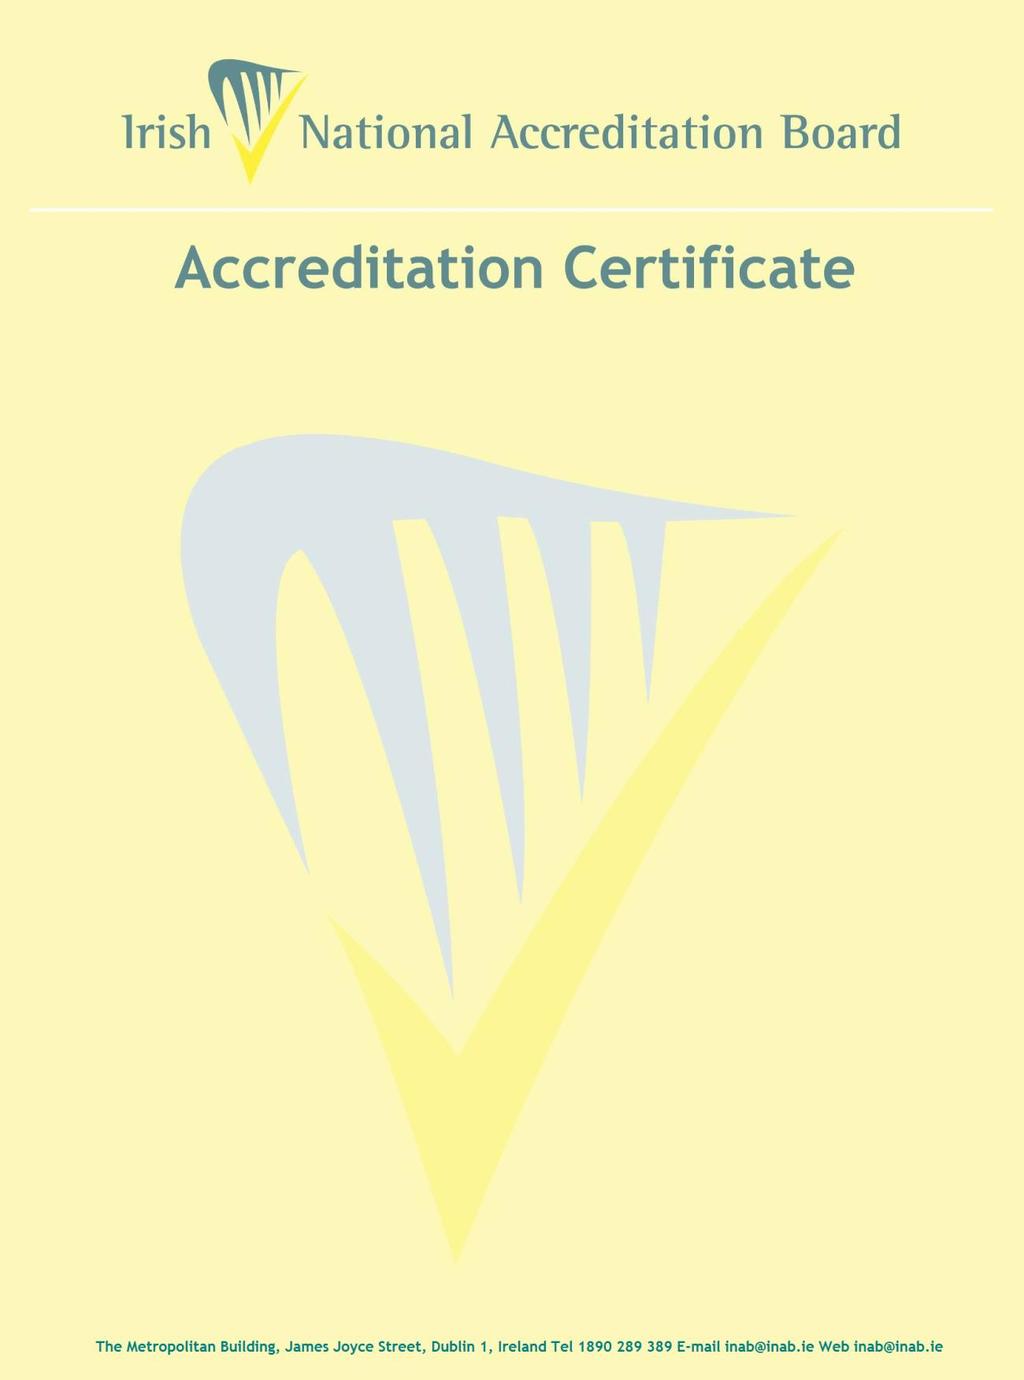 Mason Technology Ltd 228 South Circular Road, Dublin 8 Calibration Laboratory Registration number: 043C is accredited by the Irish National Board (INAB) to undertake calibration as detailed in the